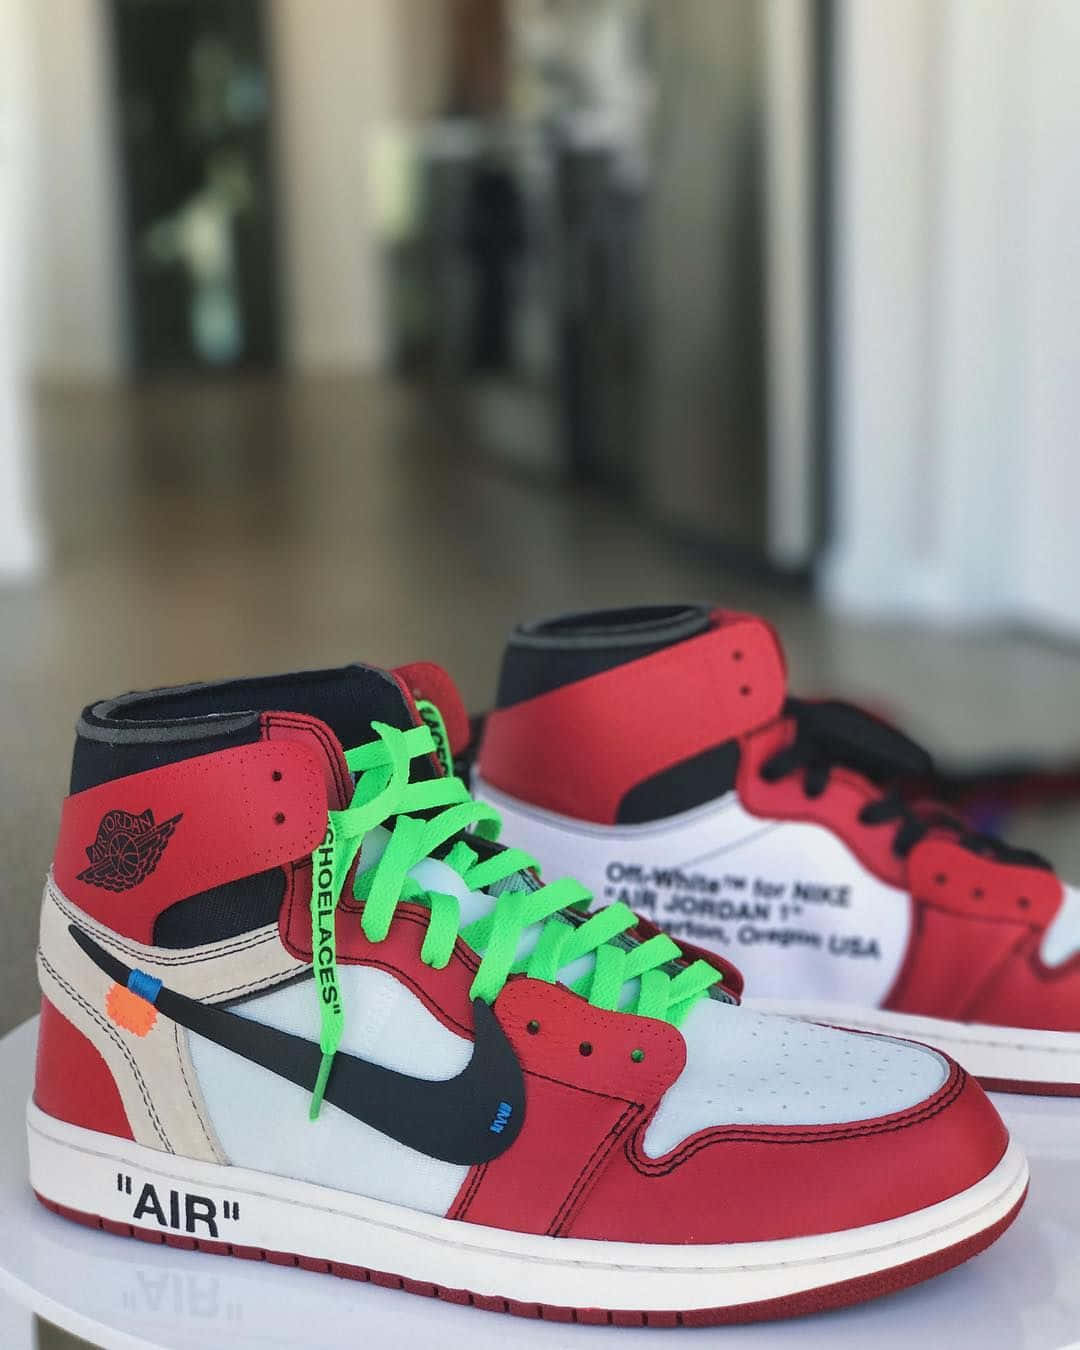 The Off White Jordan 1 – Combining style, durability and iconic design Wallpaper